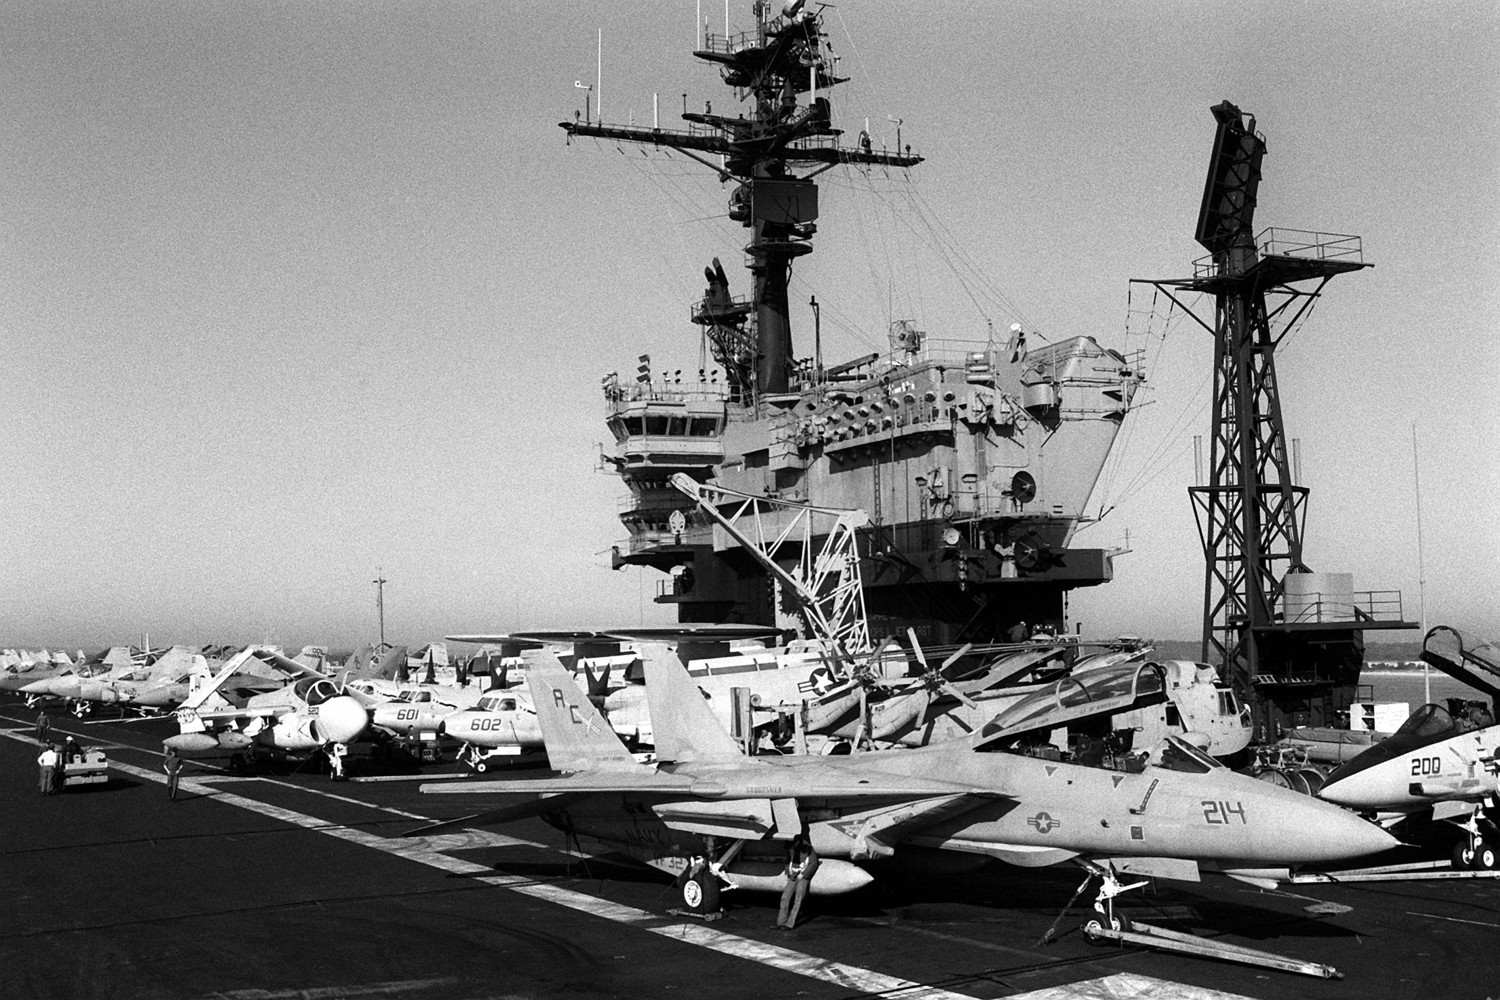 cvw-3 carrier air wing us navy uss john f. kennedy cv-67 embarked squadrons 32